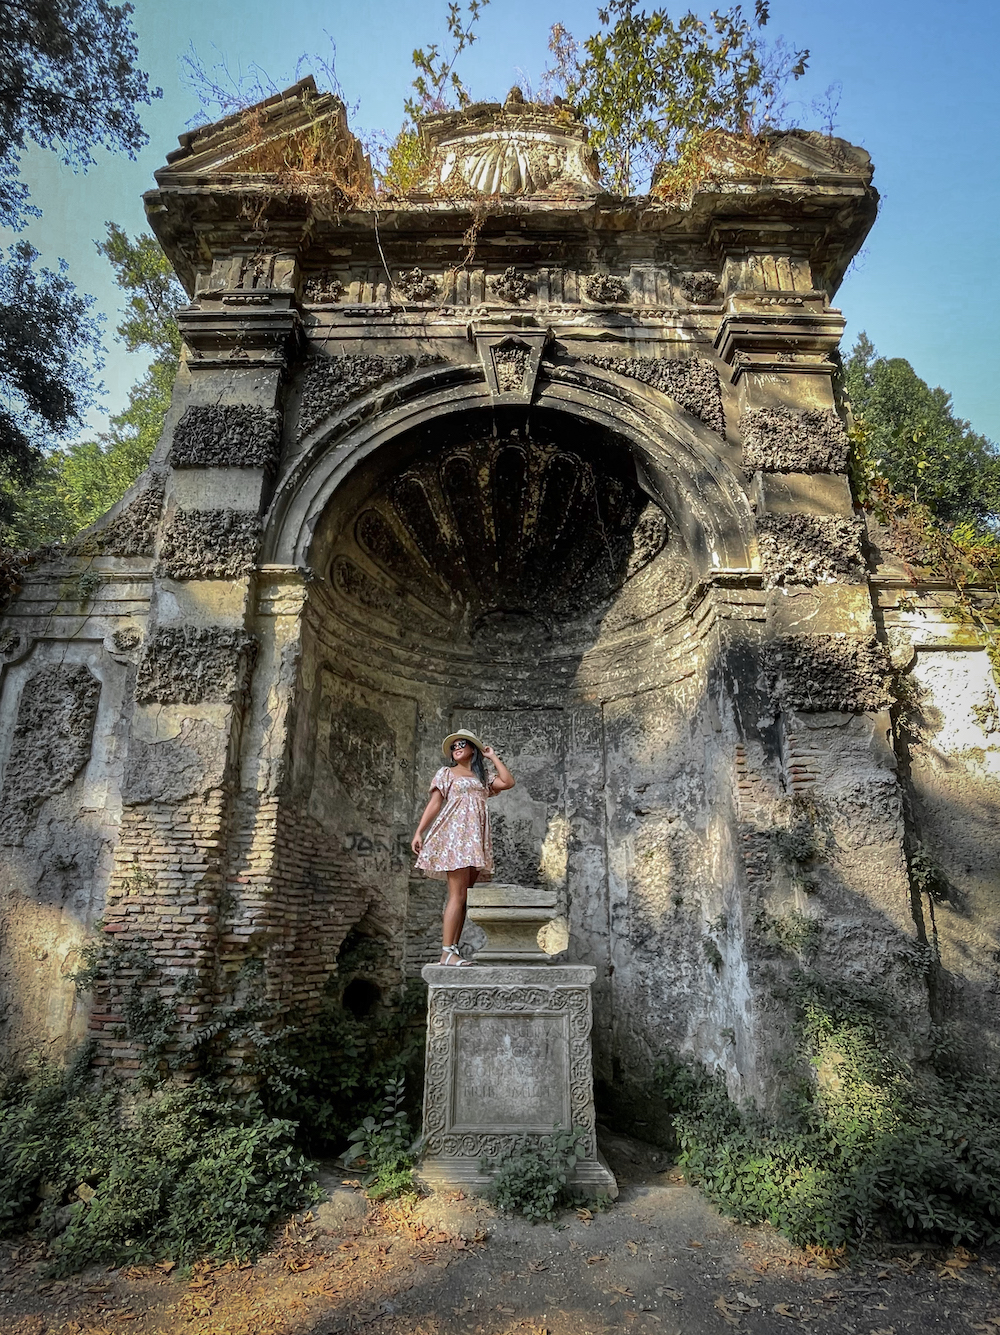 old ruins in Rome Italy mini dress and sandals